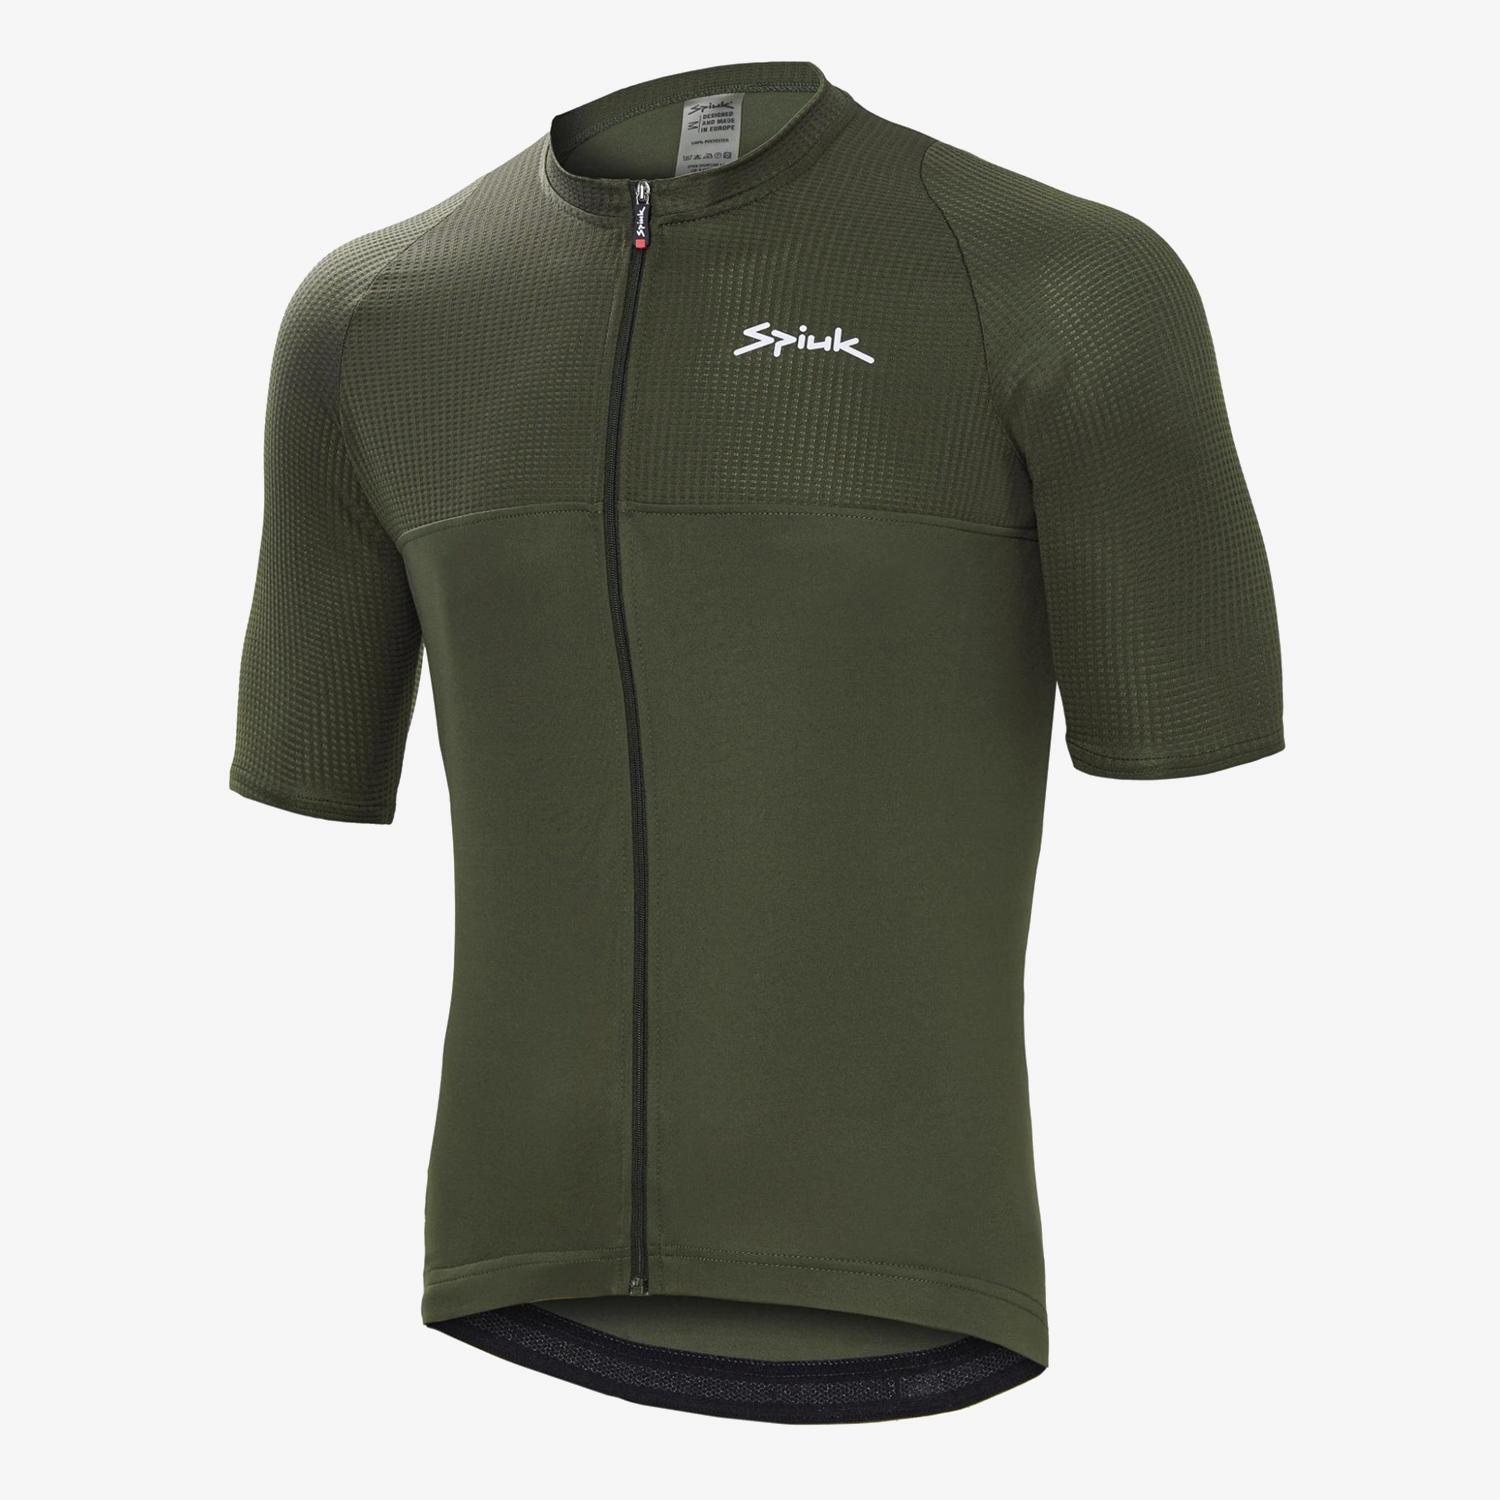 Spiuk Anatomic - Vert - Maillot Cyclisme Homme sports taille 2XL